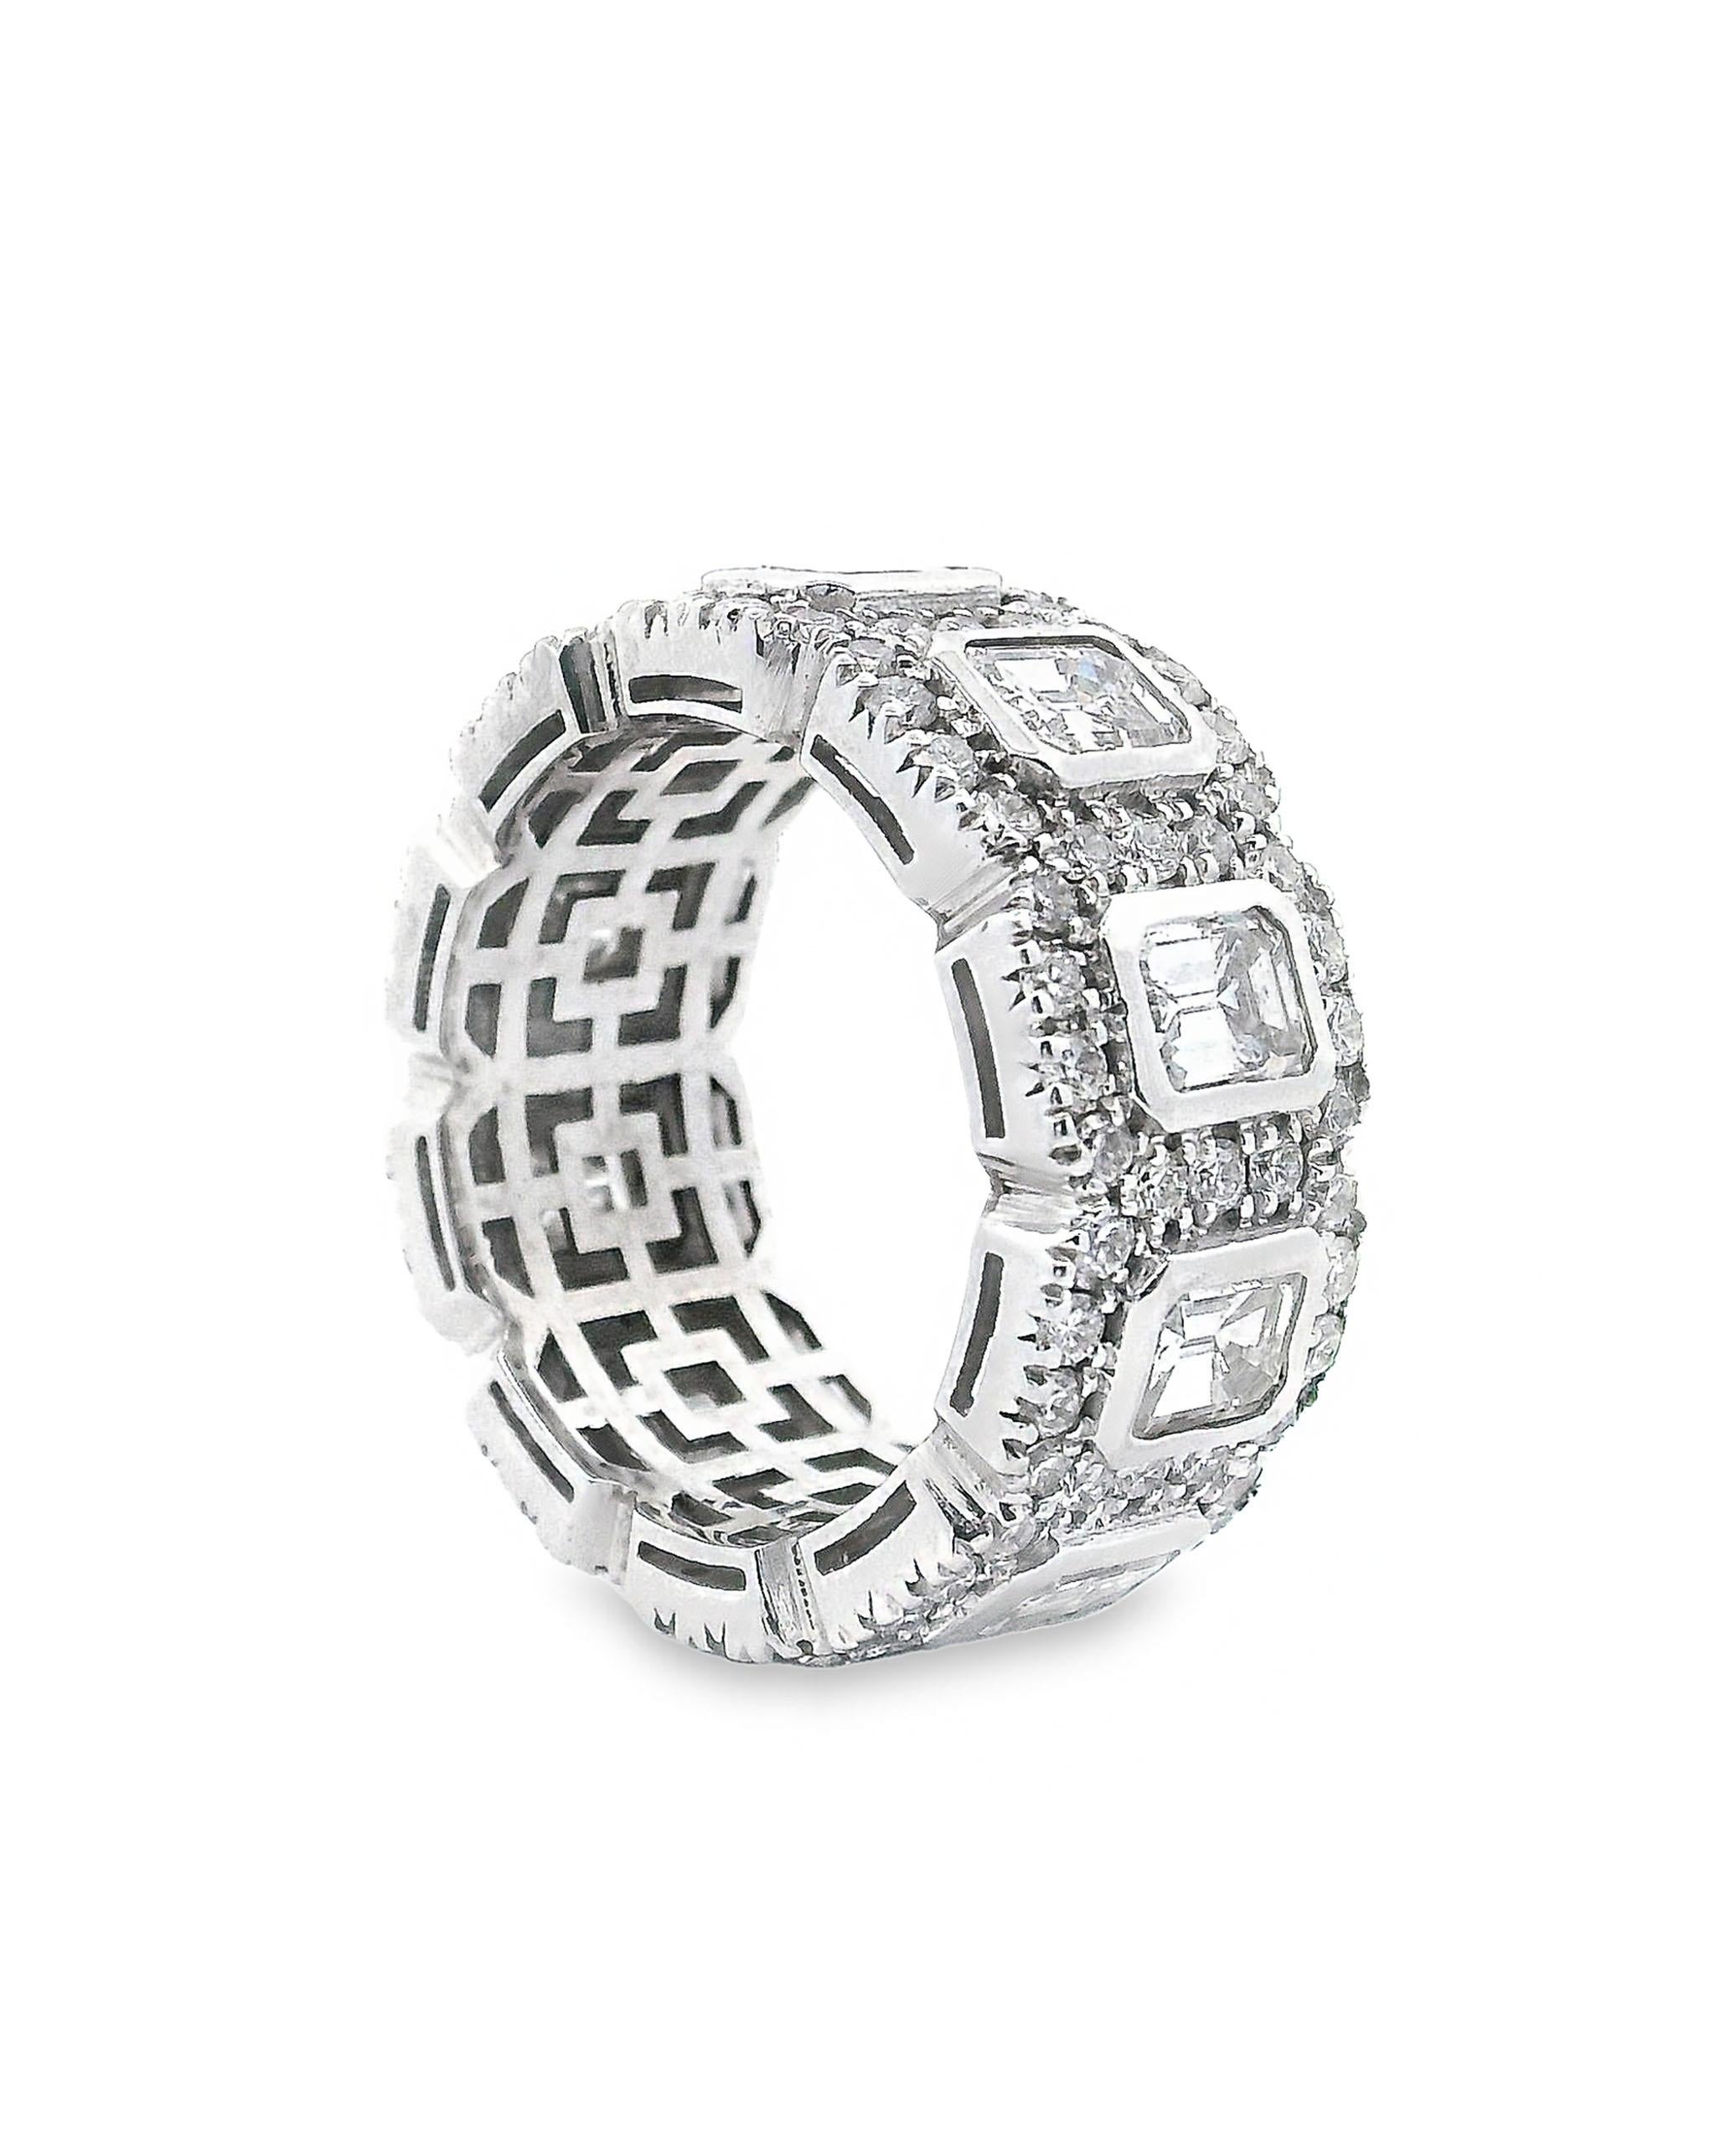 14K white gold diamond ring with 110 round brilliant-cut diamonds weighing 1.56 carats total and 10 emerald-cut diamonds weighing 3.45 carats total.

- 9.2mm wide
- Finger size 5.75
- Diamonds are G/H color, VS2/SI1 clarity.